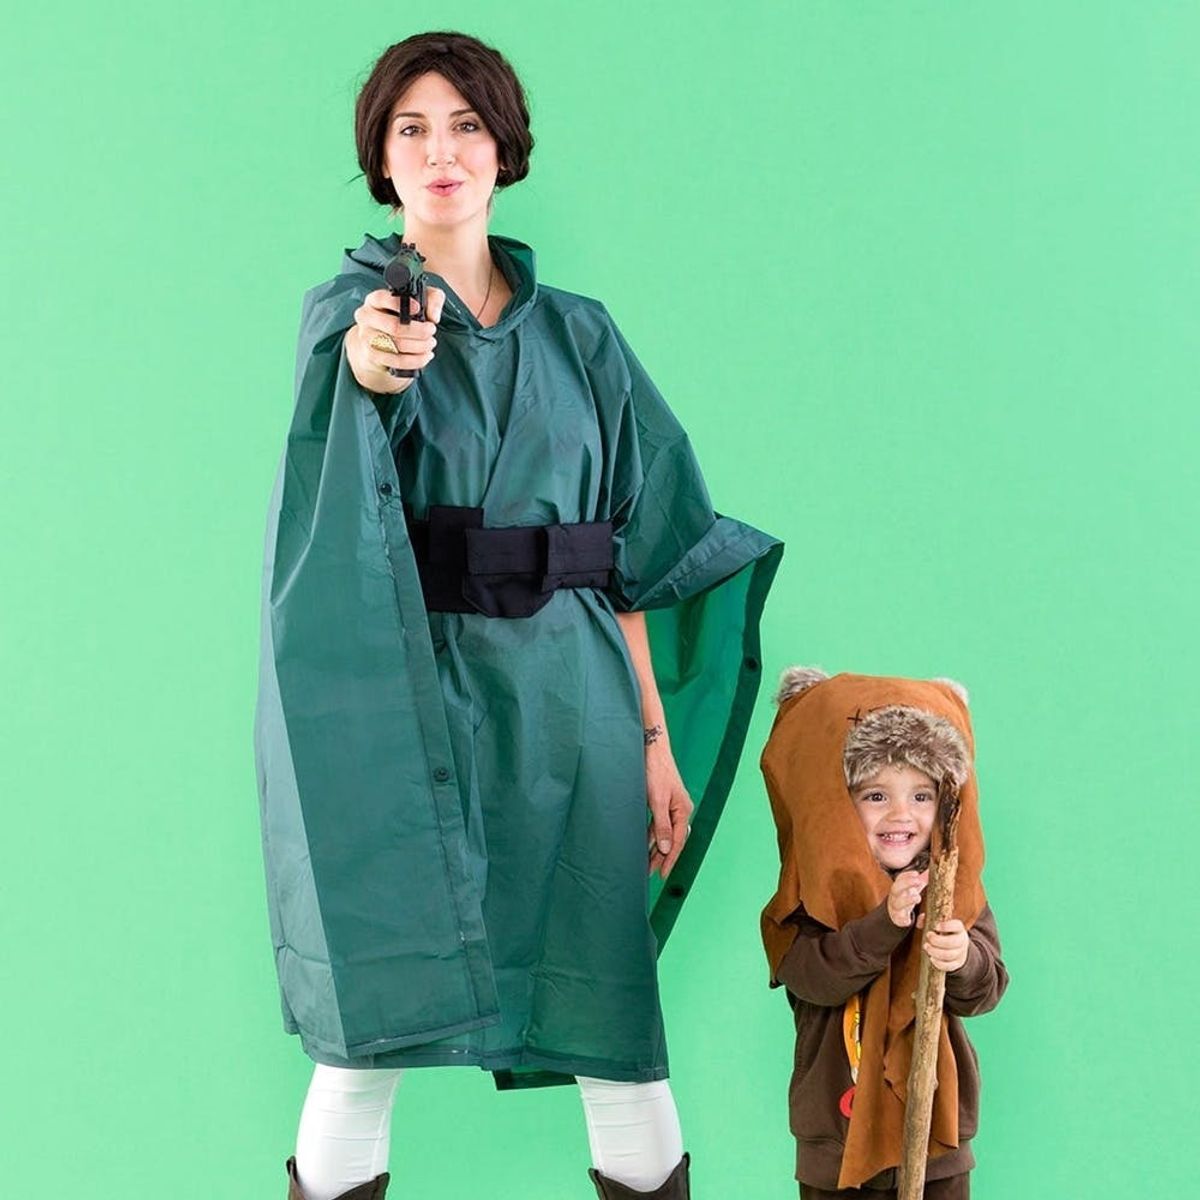 Channel the Force With These Leia and Ewok Halloween Costumes